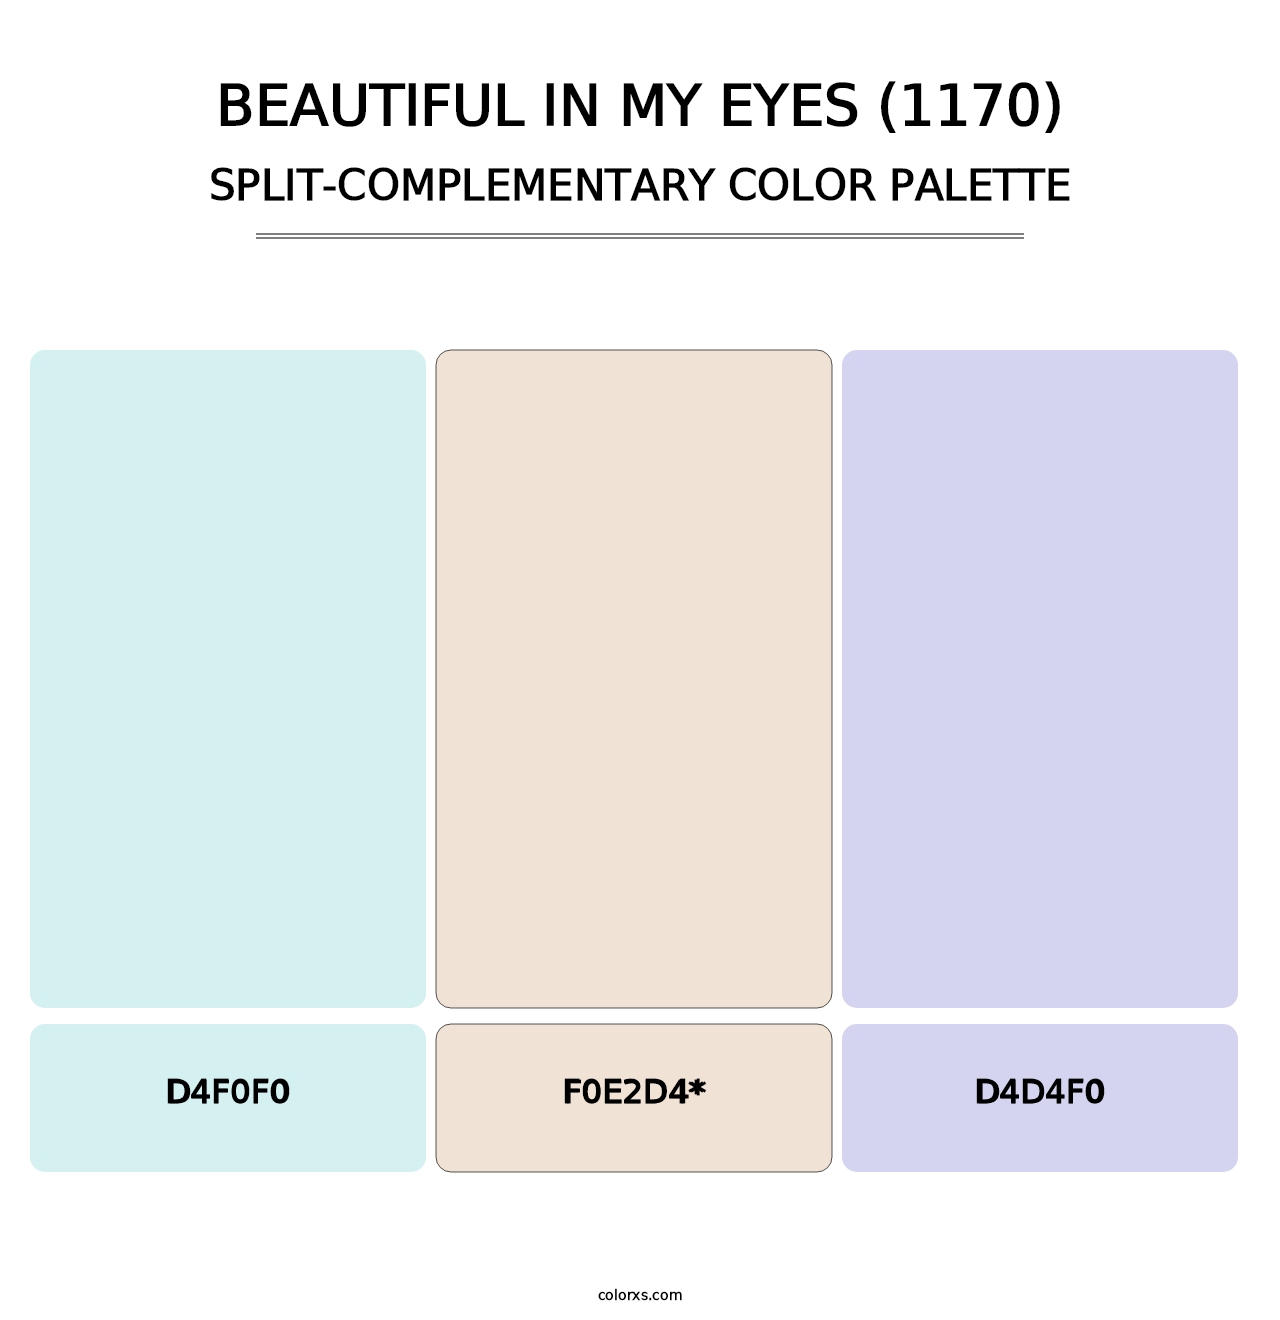 Beautiful in My Eyes (1170) - Split-Complementary Color Palette